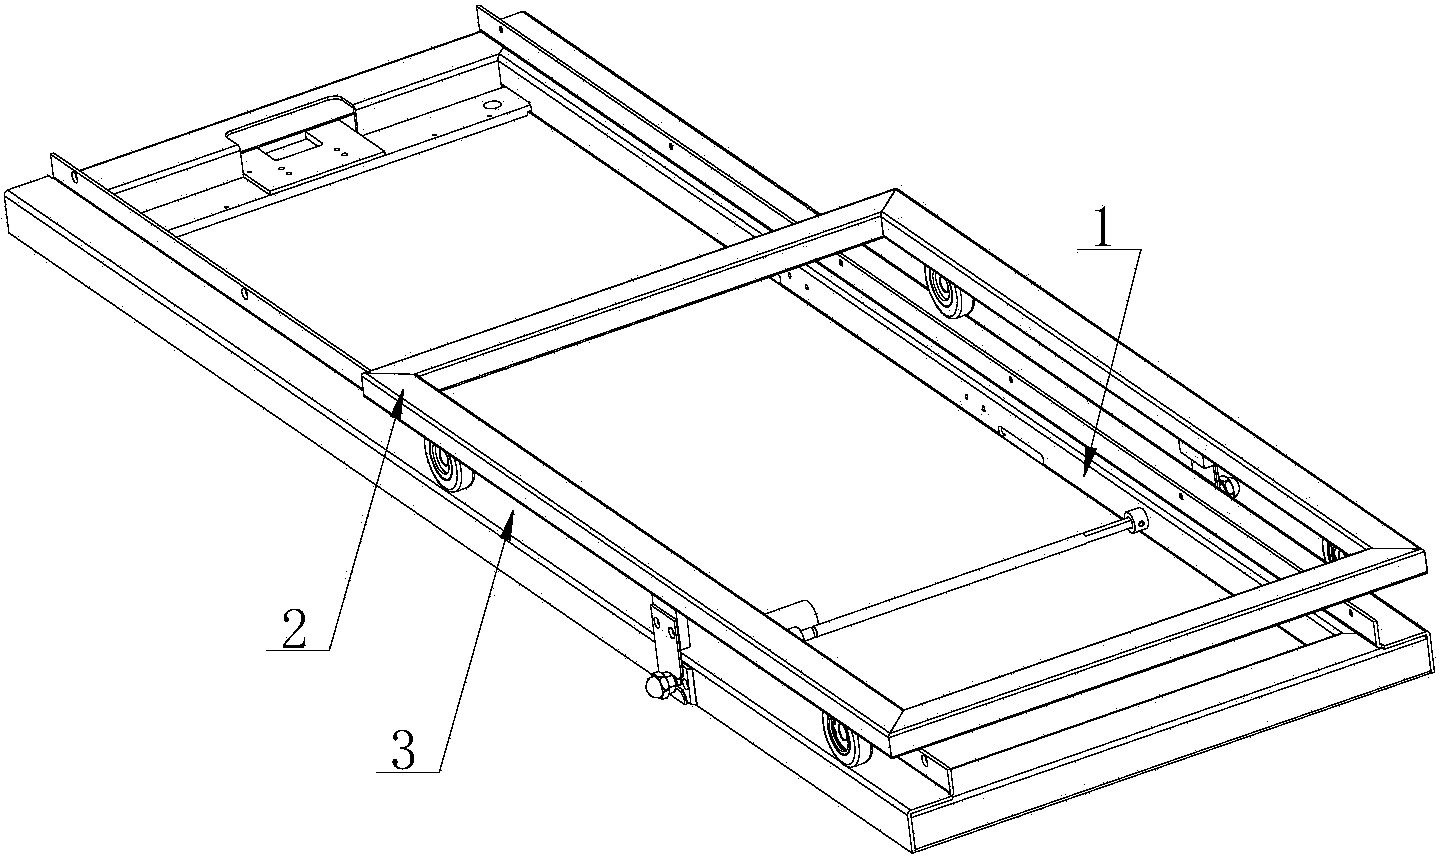 Mobile platform locking device used for vehicle-mounted safety inspection equipment